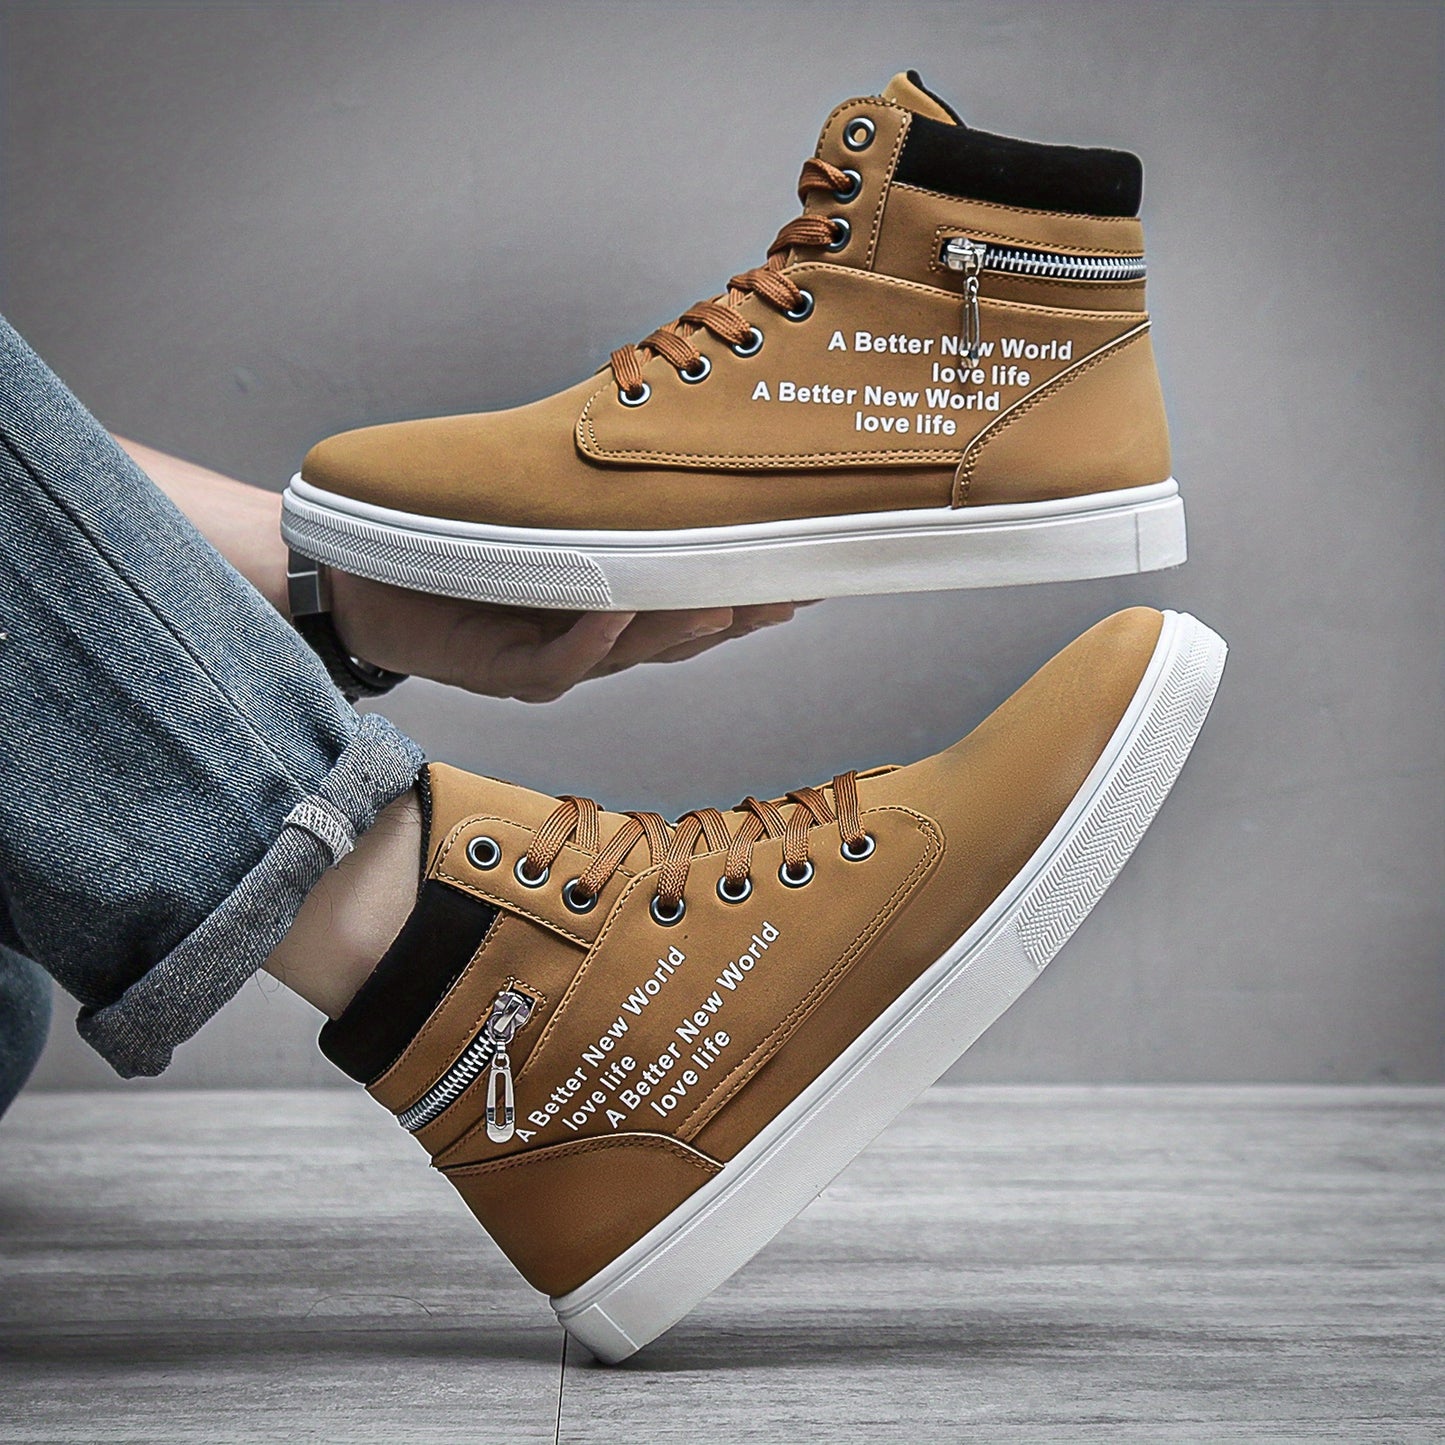 Men's Lace-up Sneakers High Top, Zipper Skate Shoes With Good Traction, Breathable